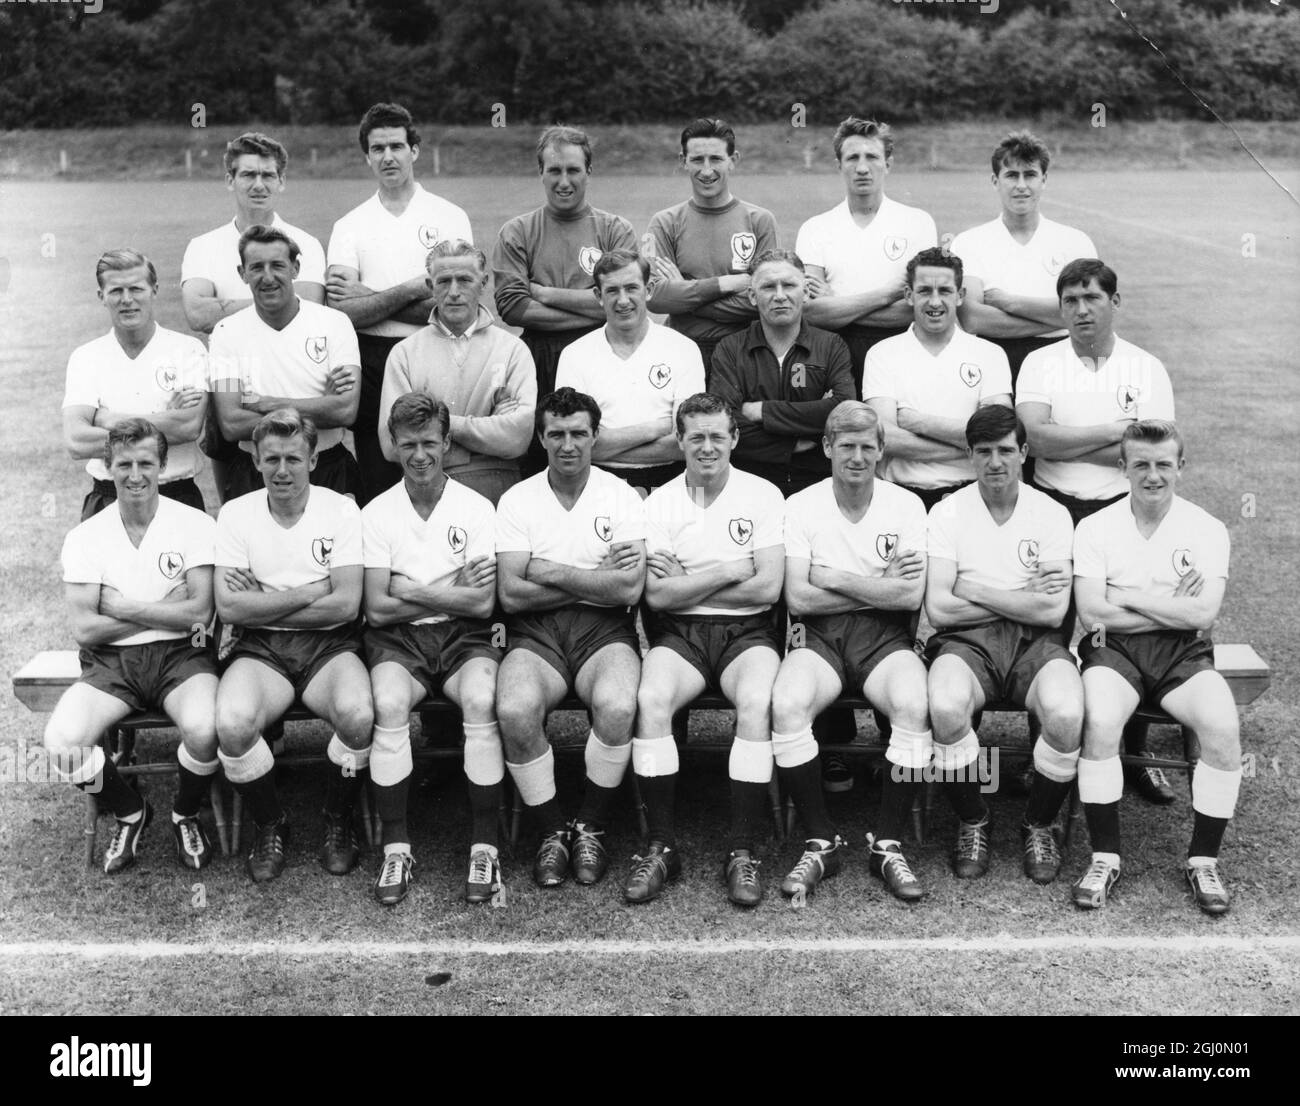 Team photo of Tottenham Hotspurs , League Champions and FA Cup holders - the first team to complete the double this century . They are , from left to right , back row : Ron Henry , Maurice Norman , John Hollowbread , Bill Brown , Melvyn Hopkins , Ken Barton. Centre Row : Peter Baker , Tony March , Mr Payton , Danny Blanchflower , Bill Nicholson , David Mackay , John Smith Front Row : Clifford Jones , Terence Medwin , John White , Robert Smith , Leslie Allen , Frank Saul , Edward Clayton and Terry Dyson August 1961 Stock Photo